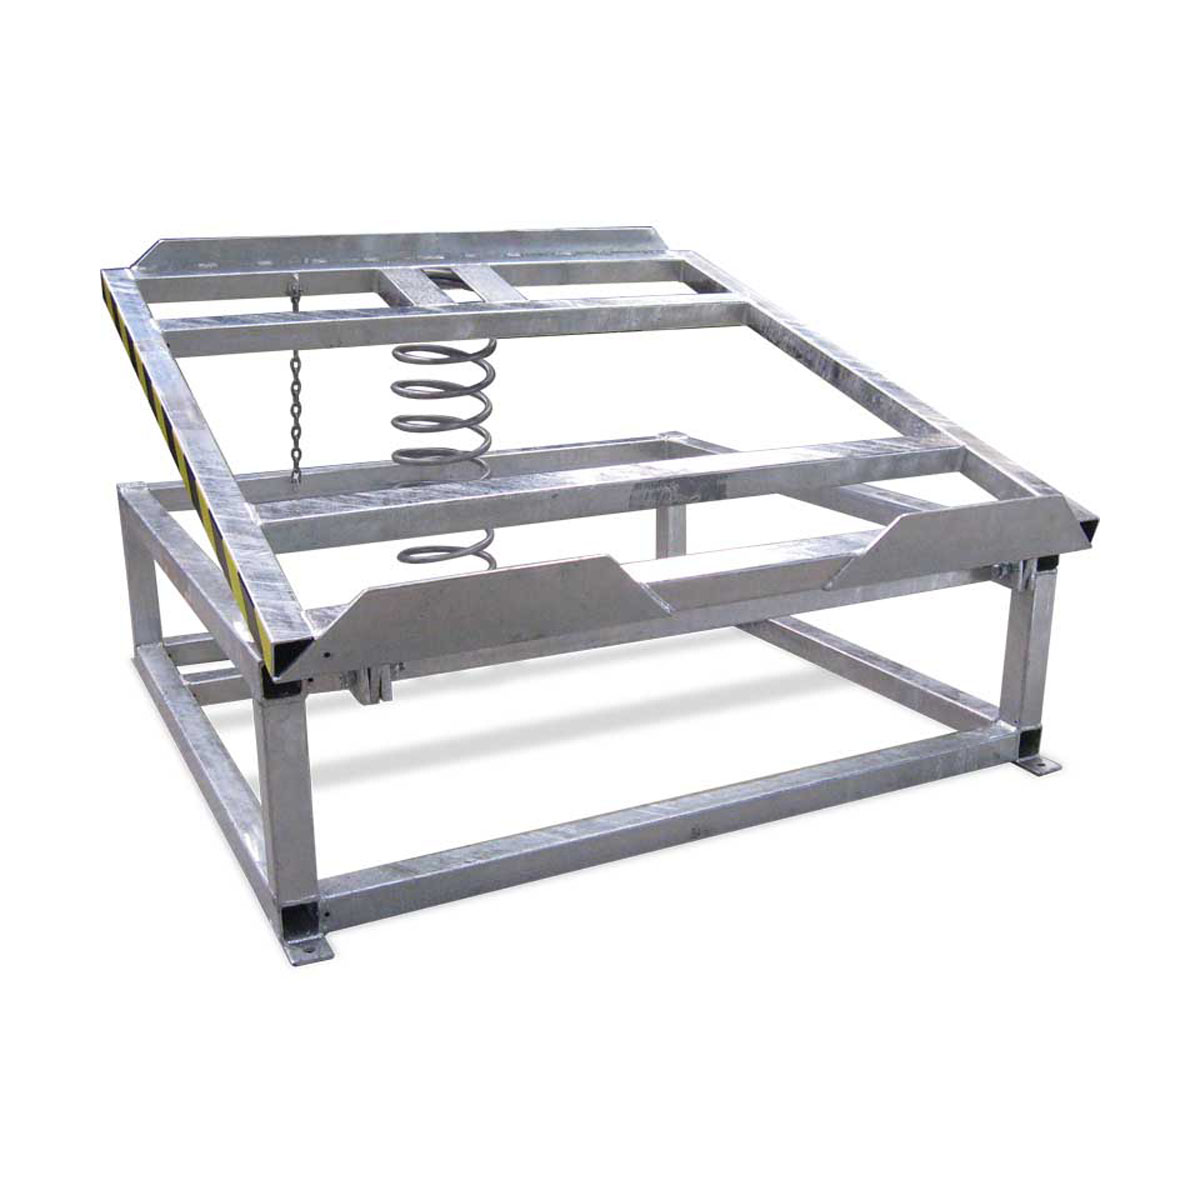 Buy Tilting Lift Table (Spring - Galvanised) in Spring-Loaded Lift Tables from Astrolift NZ